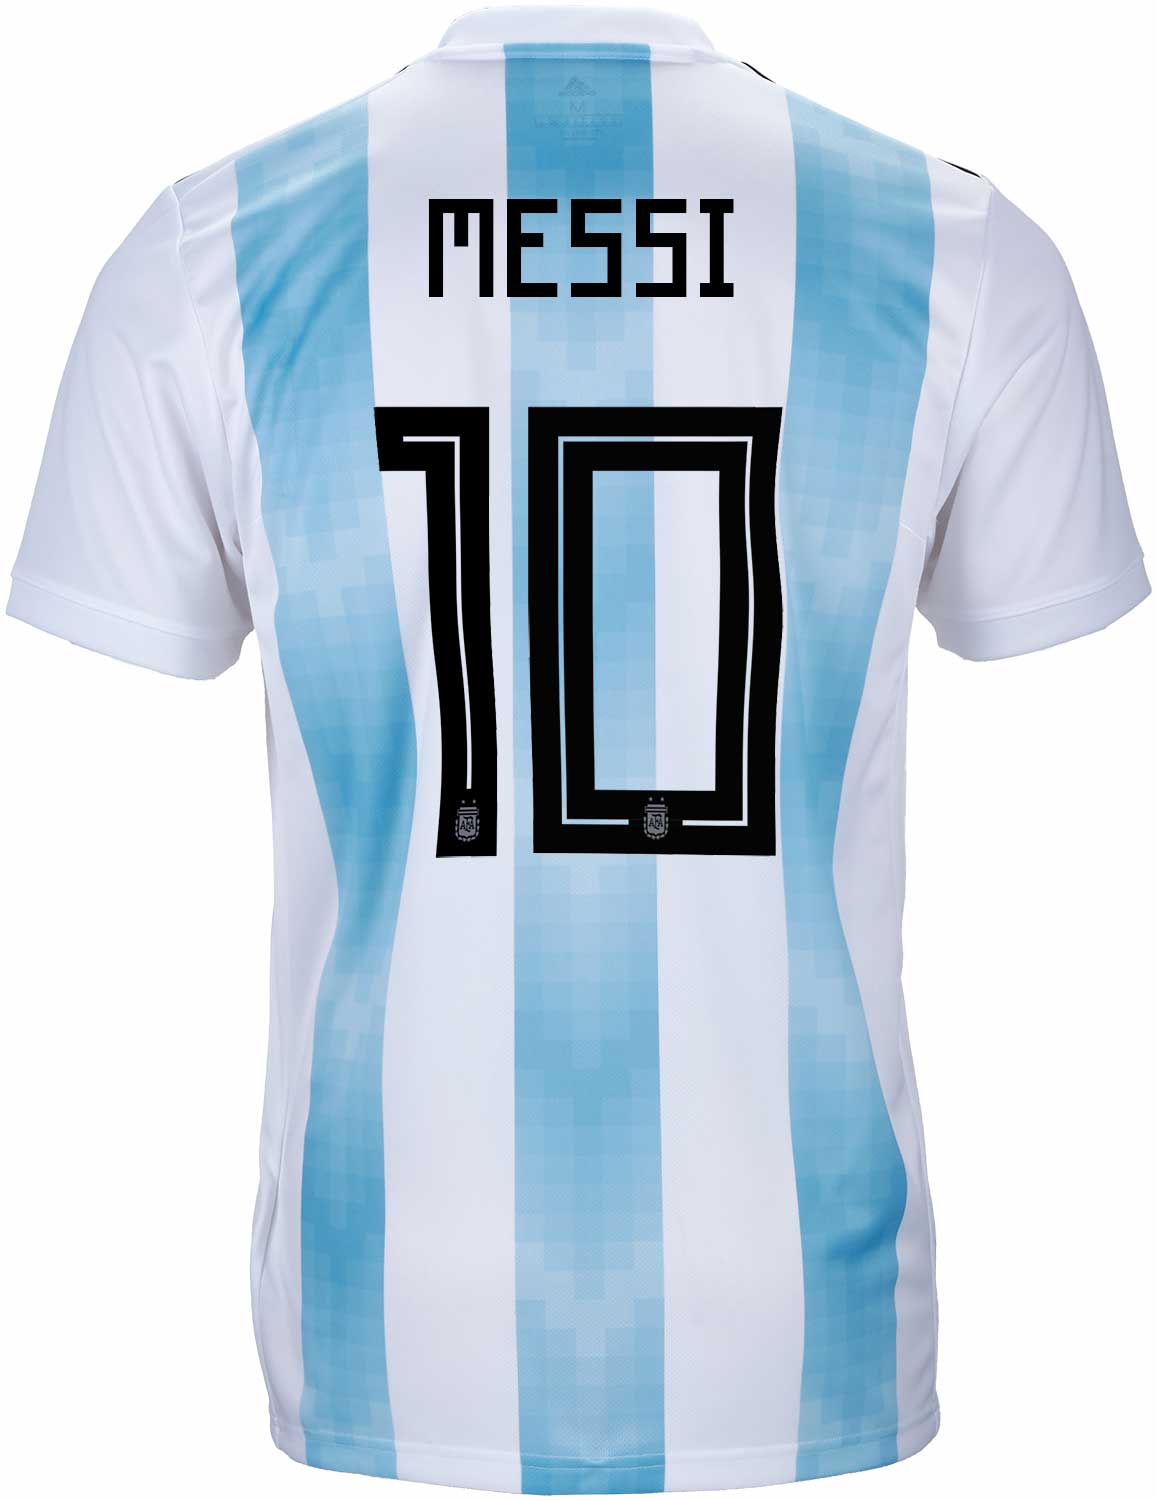 lionel messi jersey number